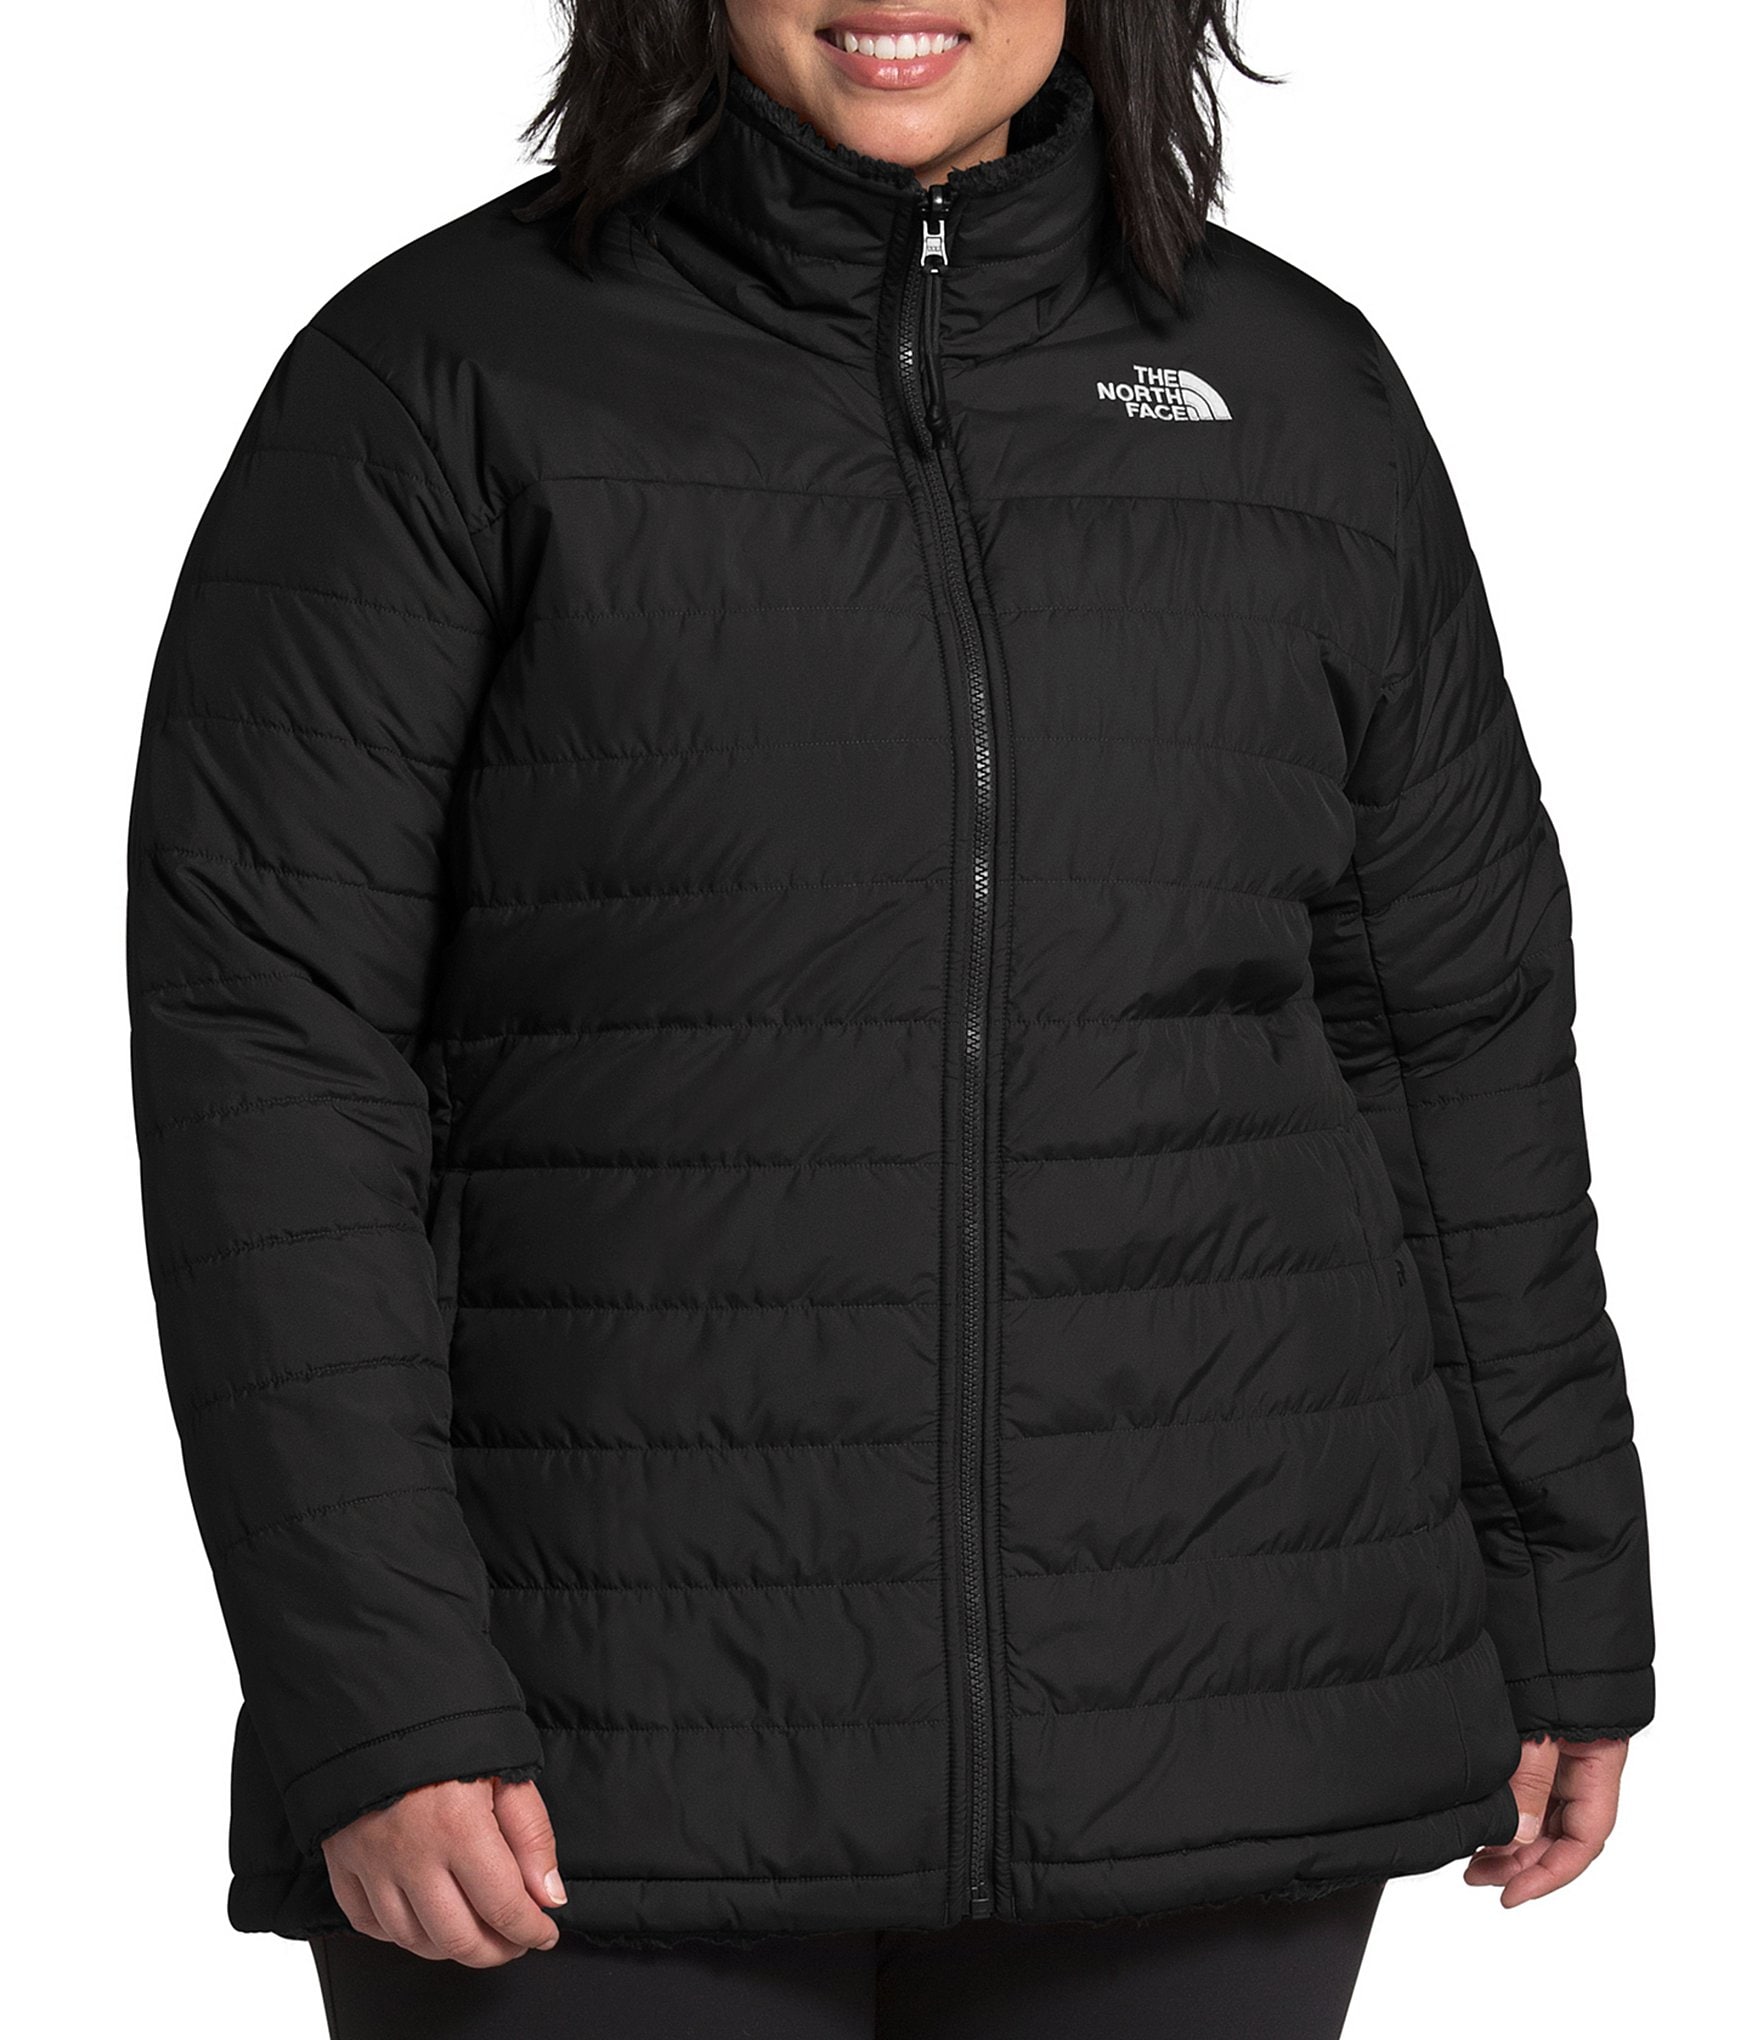 The North Face Mossbud Insulated Reversible Jacket In Black | lupon.gov.ph